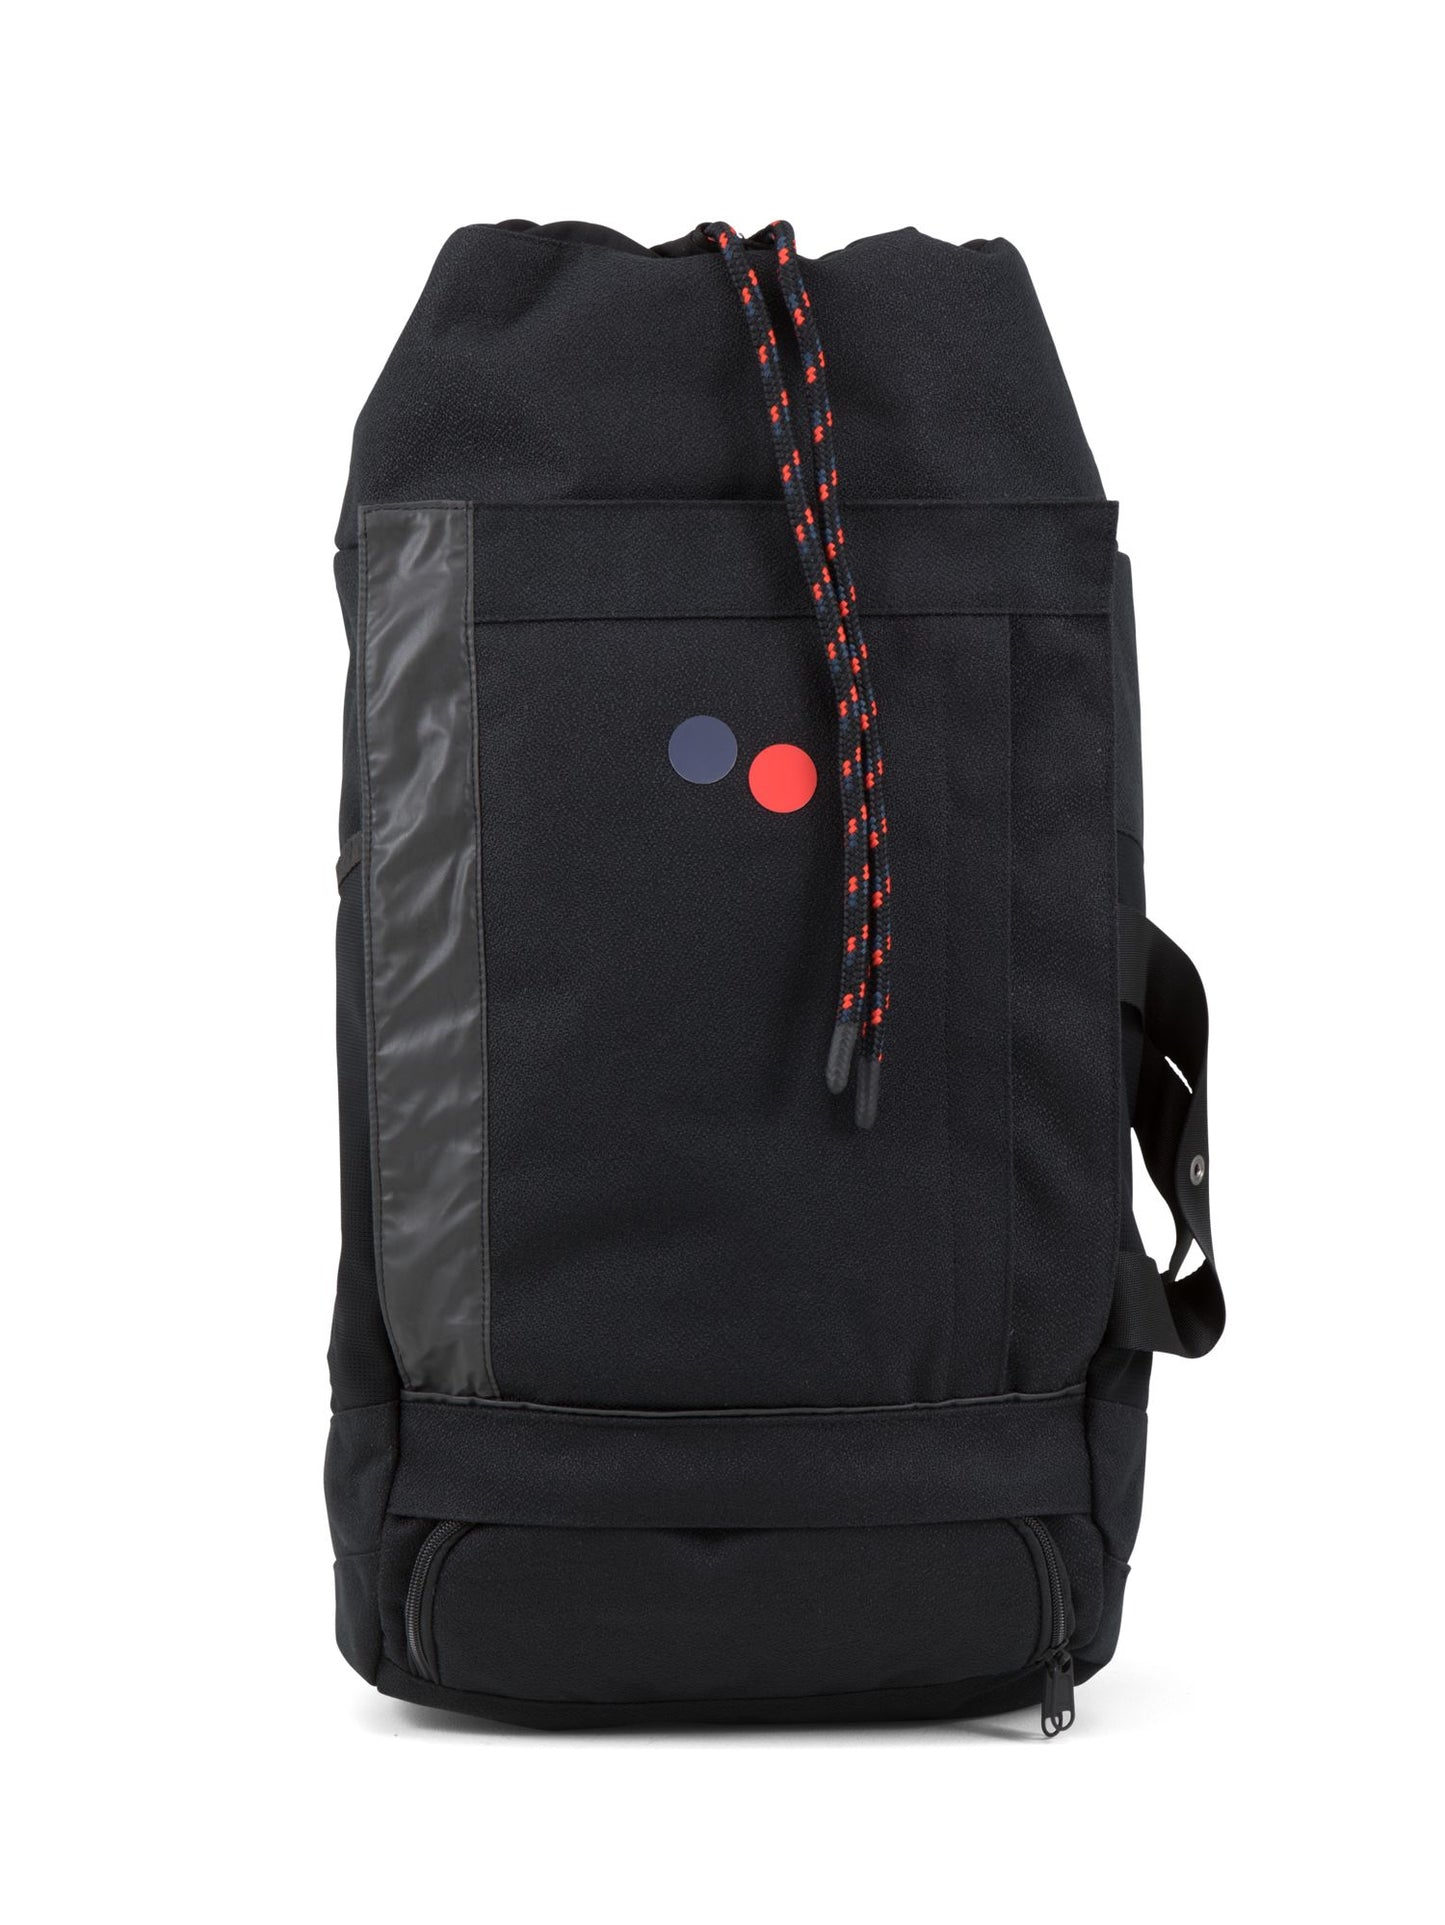 pinqponq-backpack-Blok-Large-Licorice-Black-front